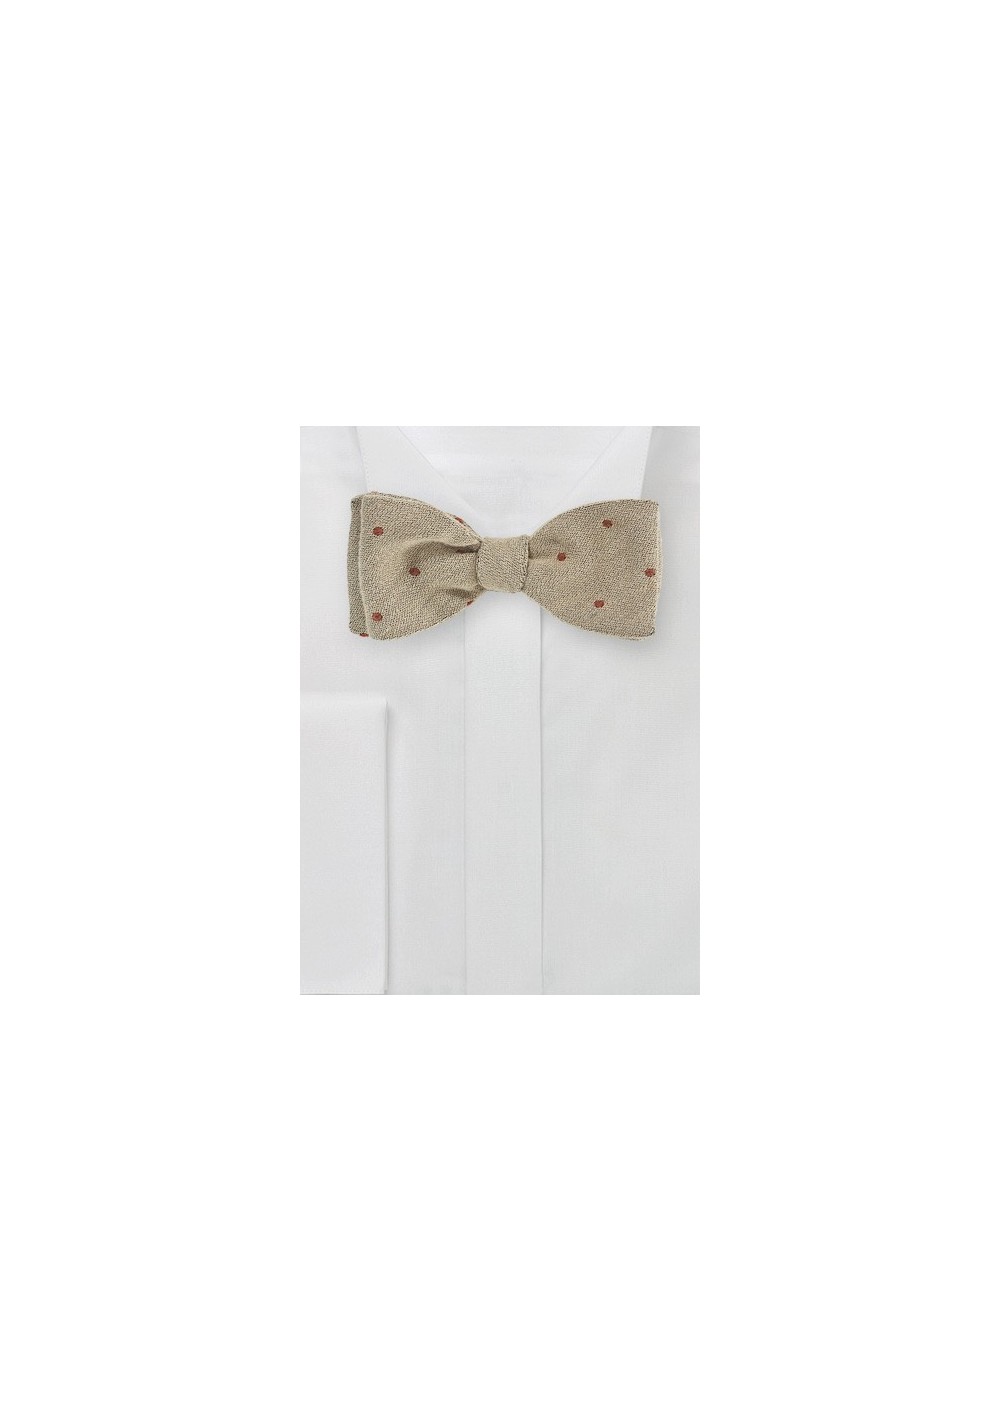 Sand Colored Wool Bow Tie with Red Dots